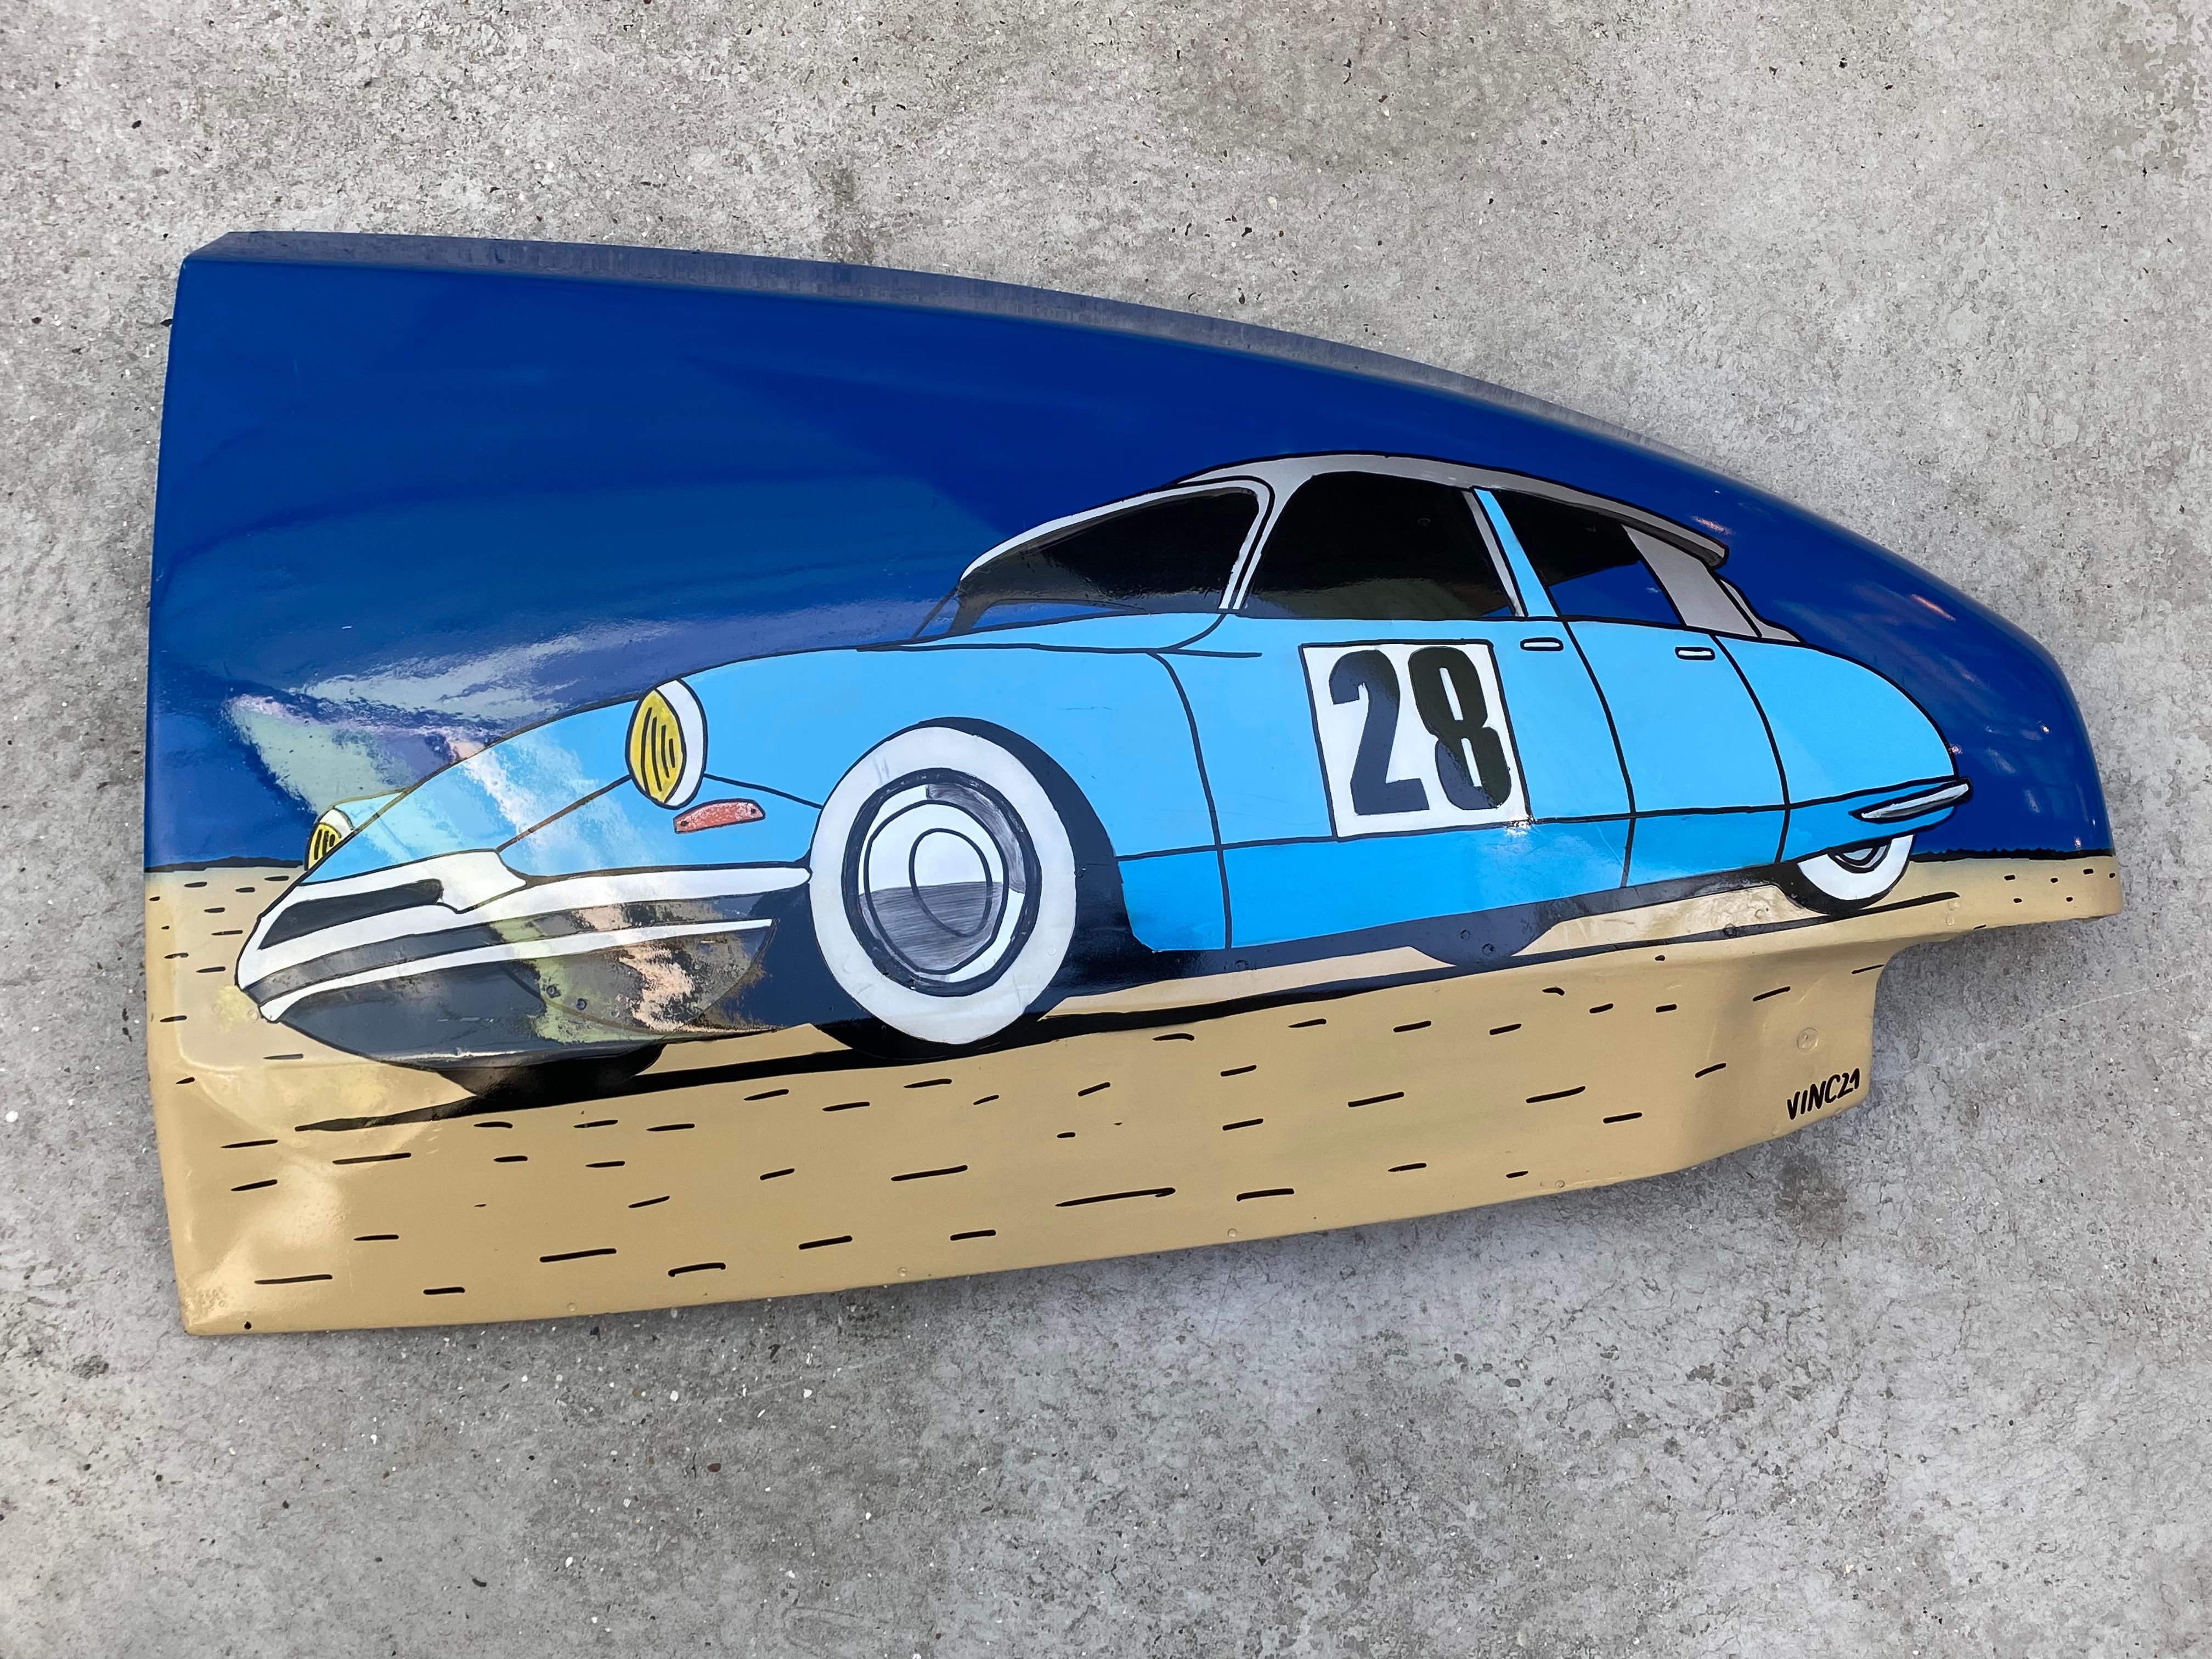 Citroen ID 19 rally Liège-Sofia- Liège
1962 
Bodywork painting - ID wing by Vinc
Posca, acrylic, automotive varnish
this piece can be displayed outside
The miniature is not sold with 
Dimensions : W 107 cm x H 65 cm x D 16 cm 
Ref : 
Price: